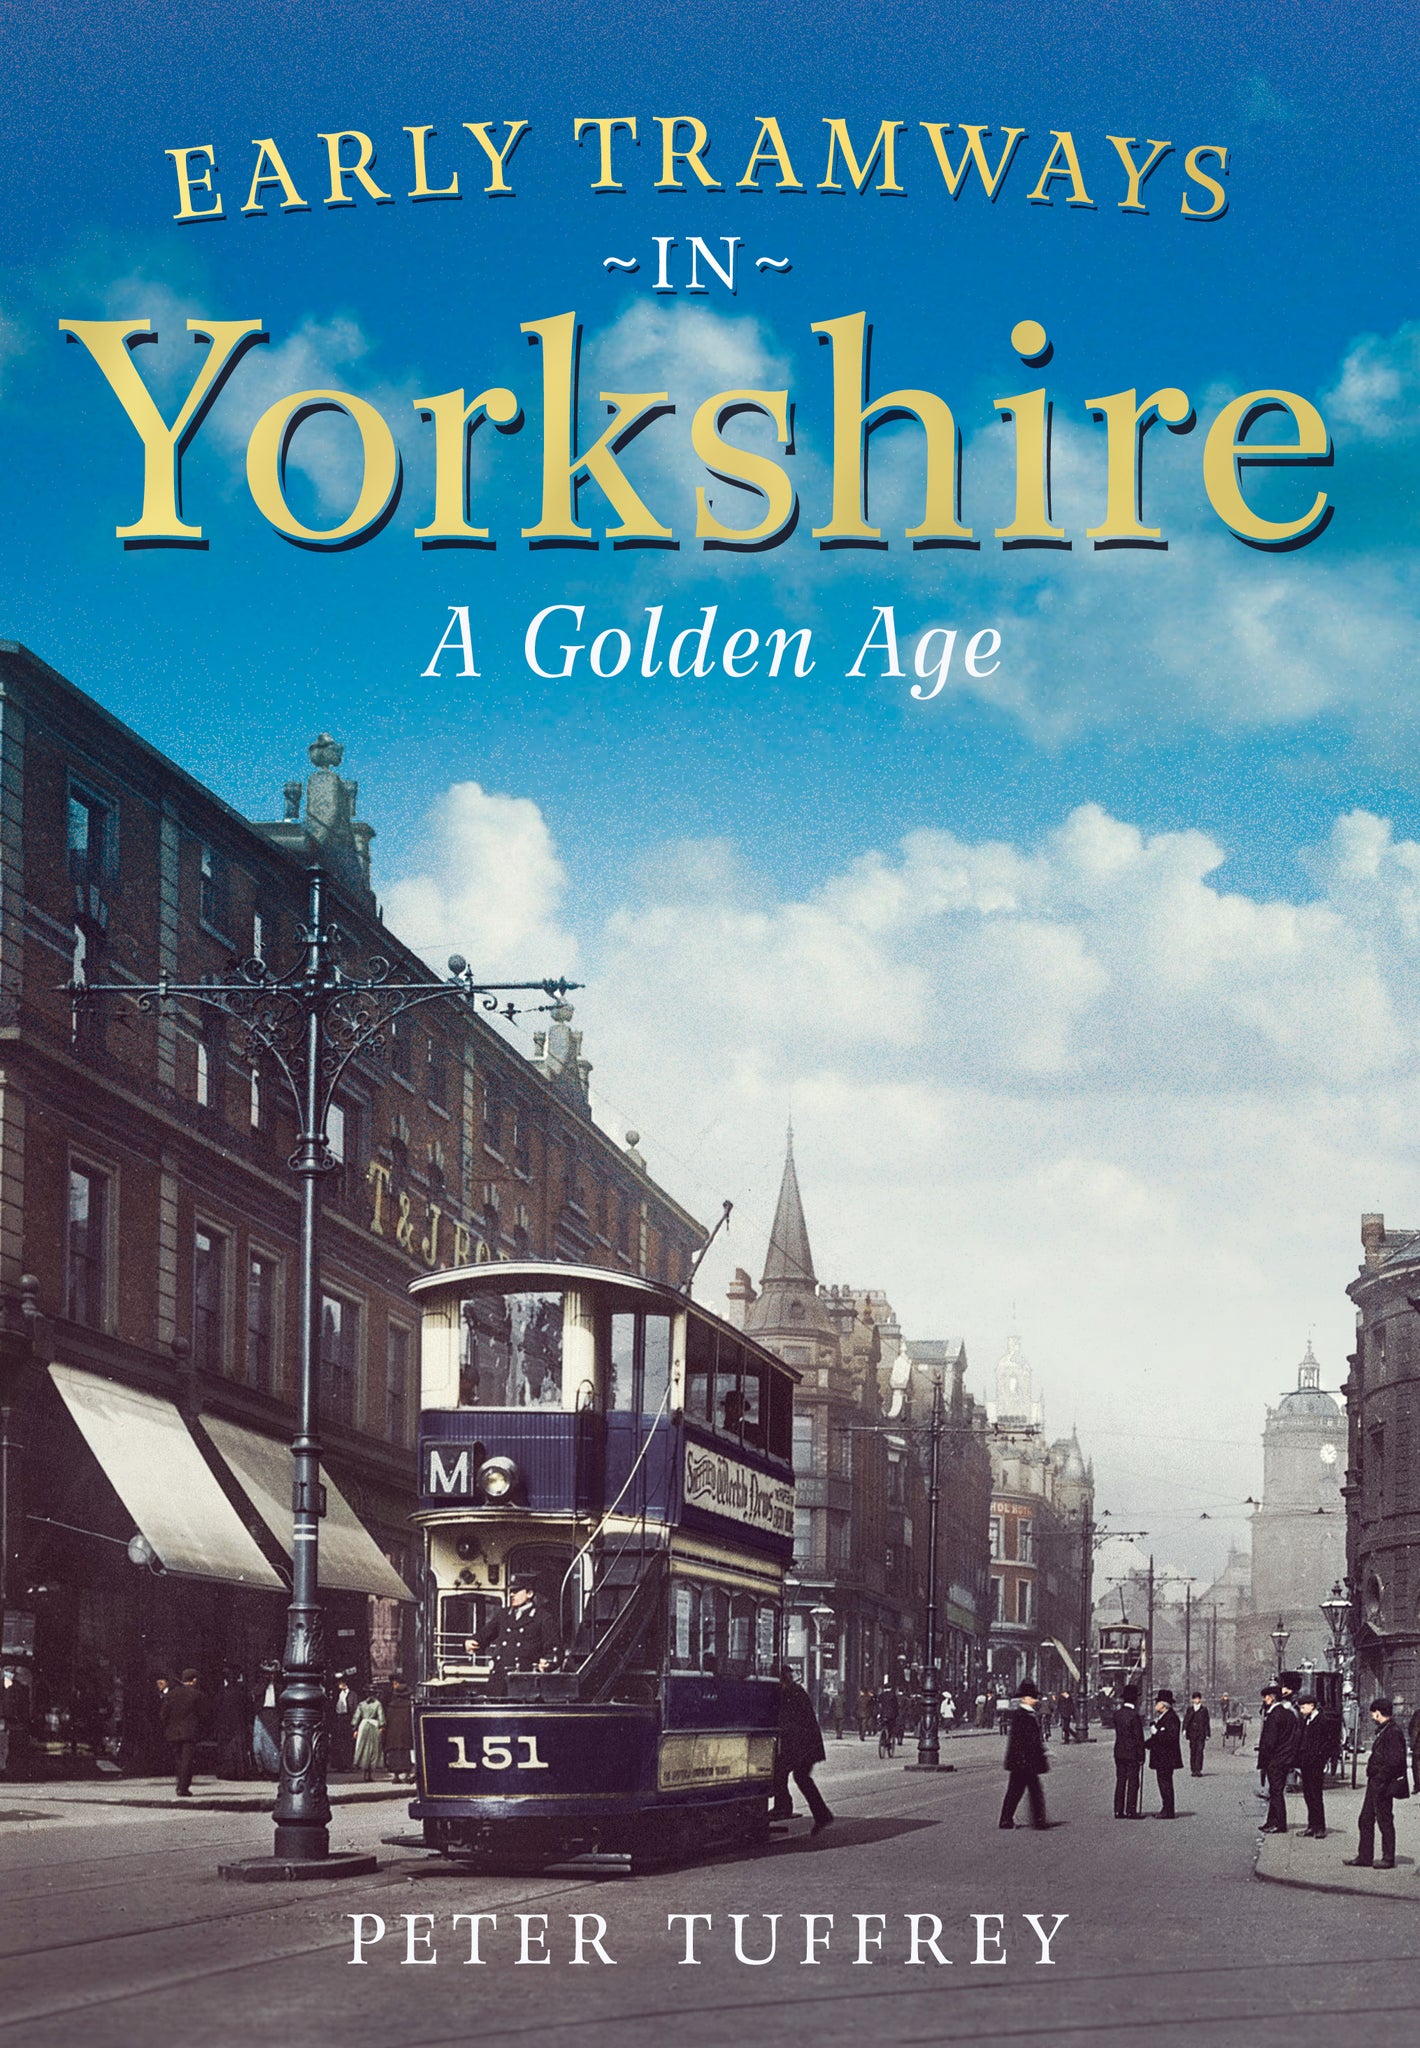 Early Tramways in Yorkshire: A Golden Age